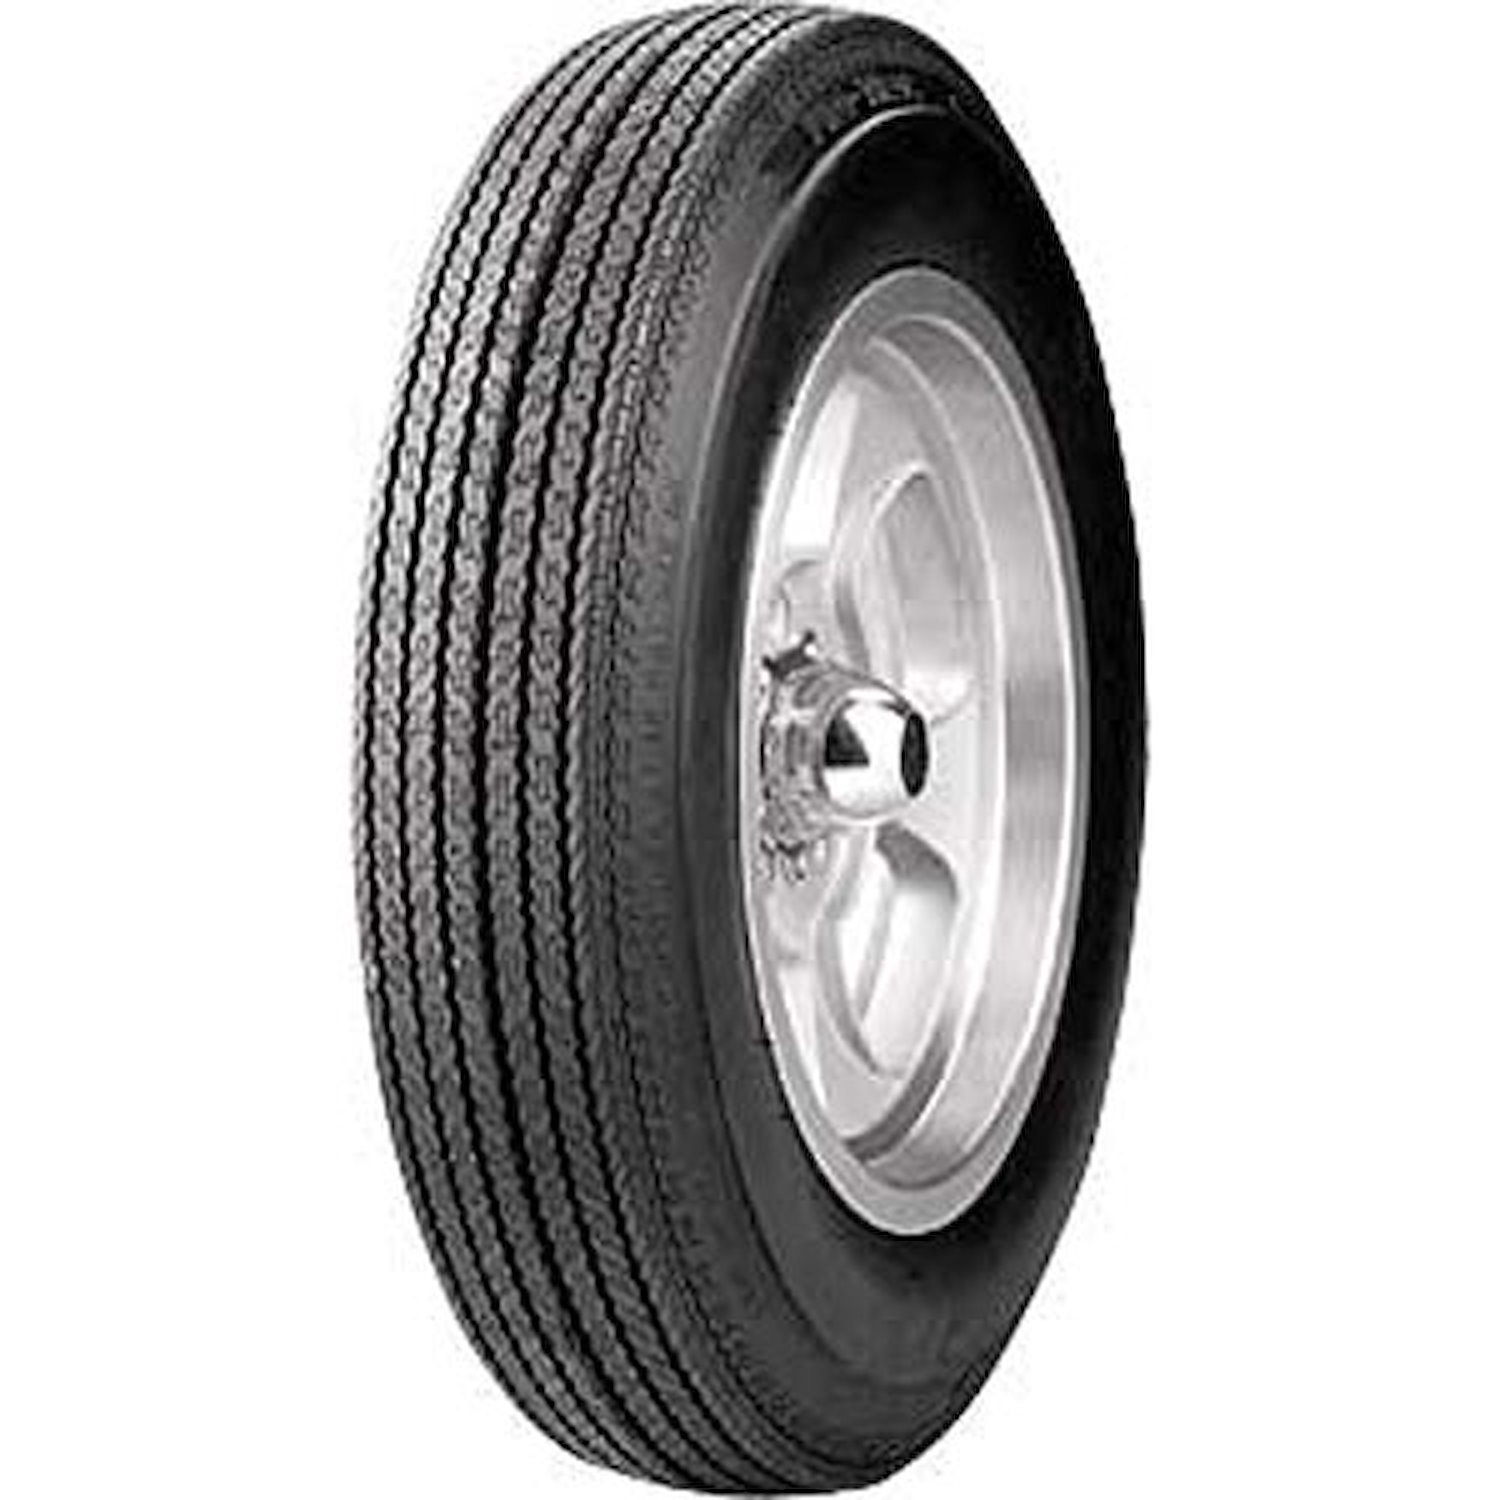 Front Pro-Trac Performance Tire 560-15